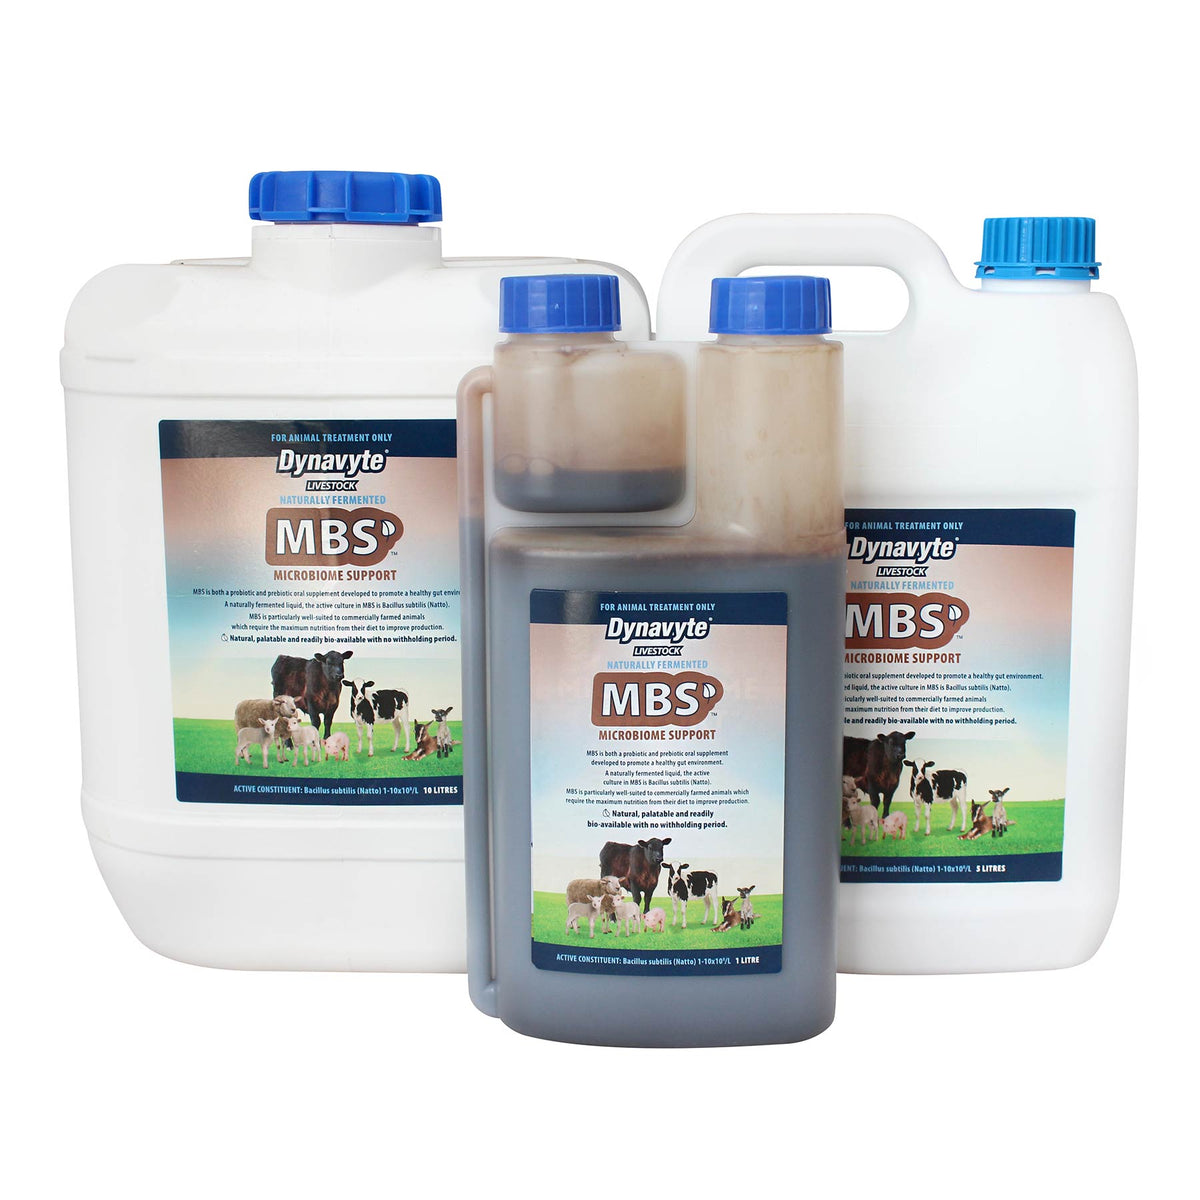 Dynavyte MBS Microbiome Support for Livestock